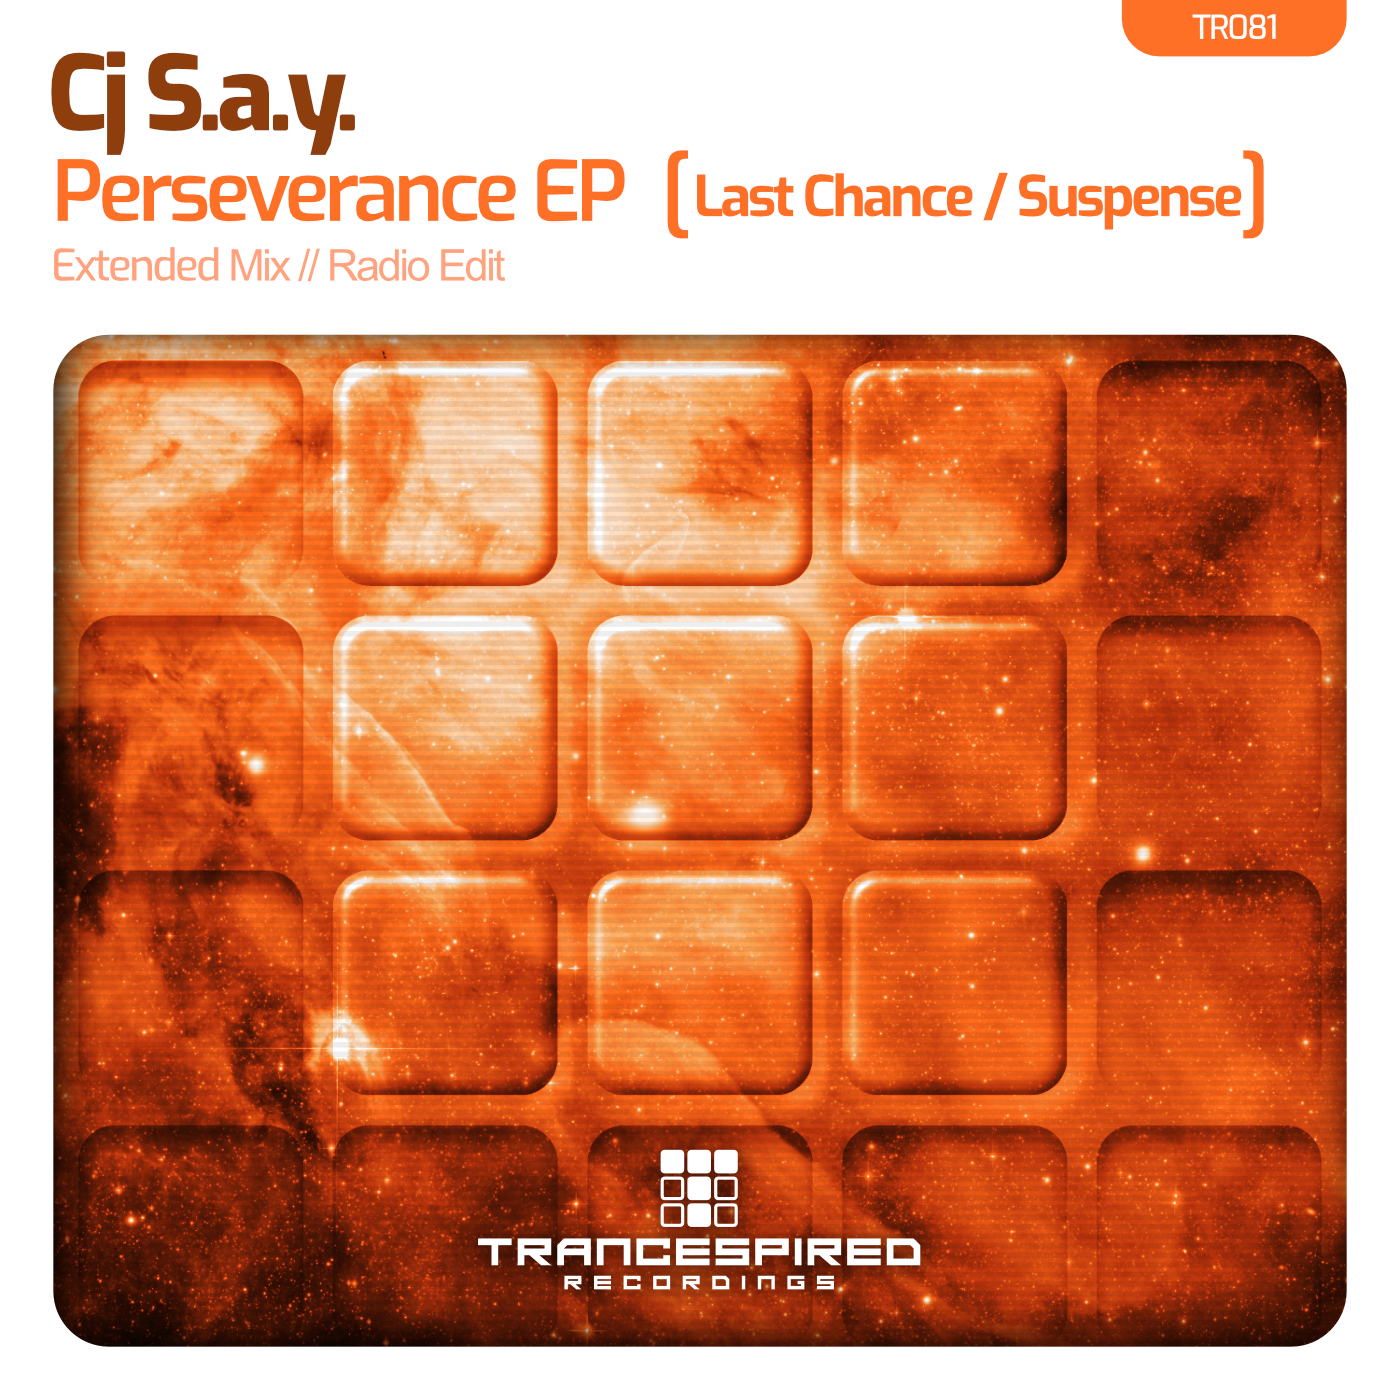 Cj S.a.y. presents Perseverance EP on Trancespired Recordings